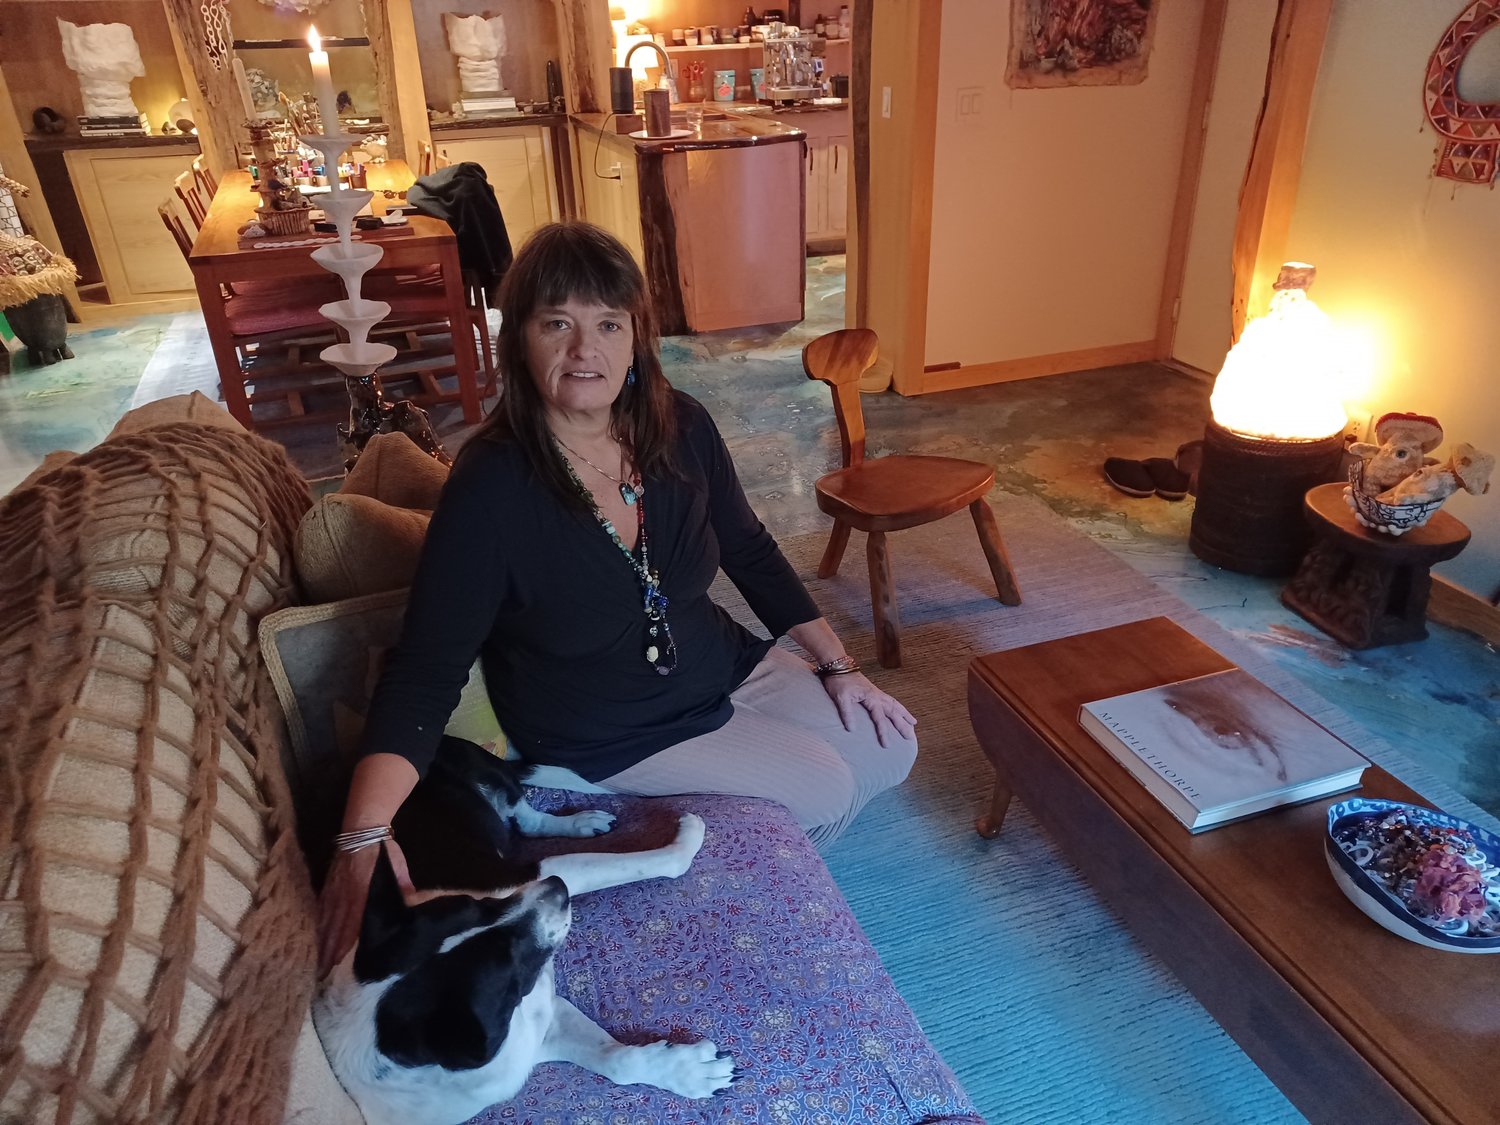 Stacy Cushman’s entire condominium is an art gallery. Even the floor is a work of art. The lamp and candle holder are her own creations, while pieces collected from all over the world fill every available space.